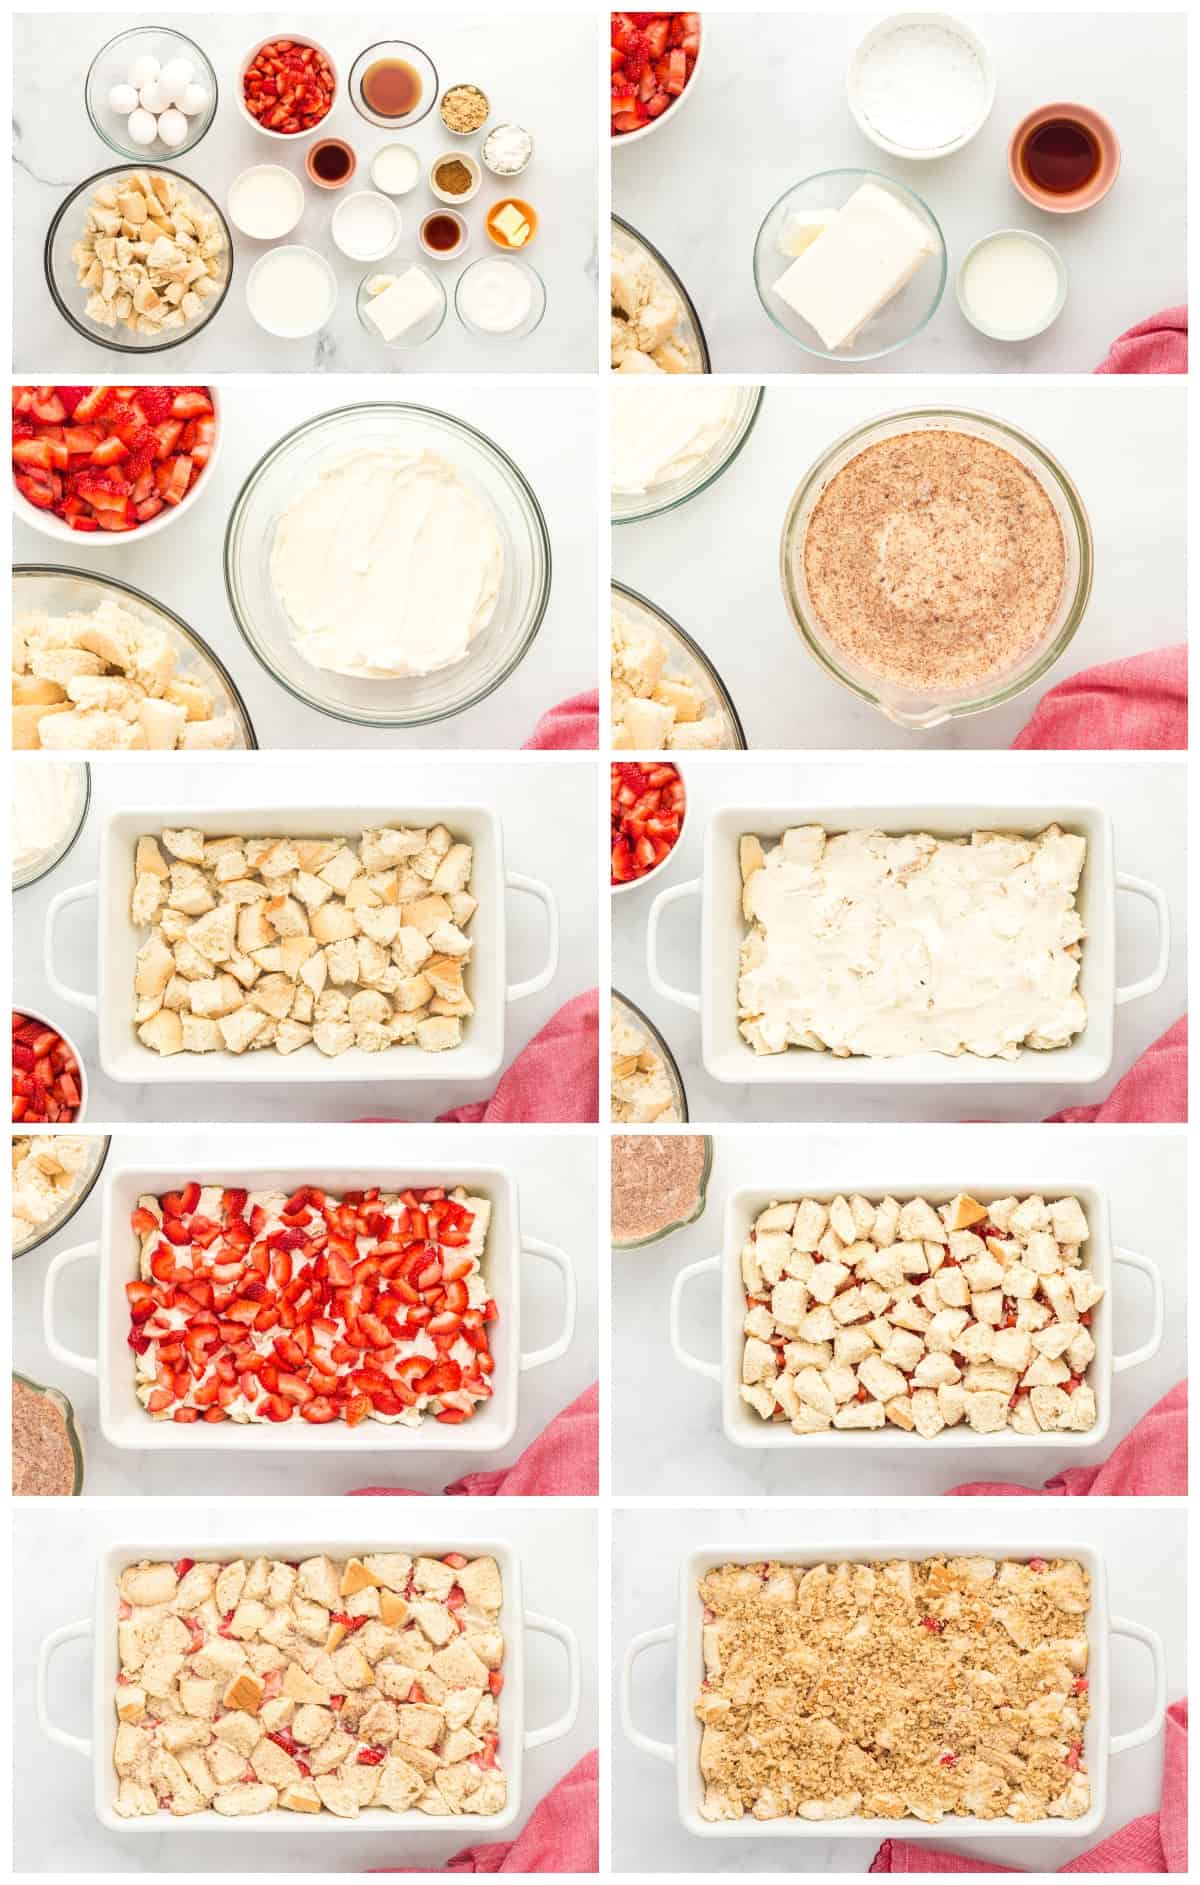 how to make strawberries and cream French toast casserole step by step photo instructions